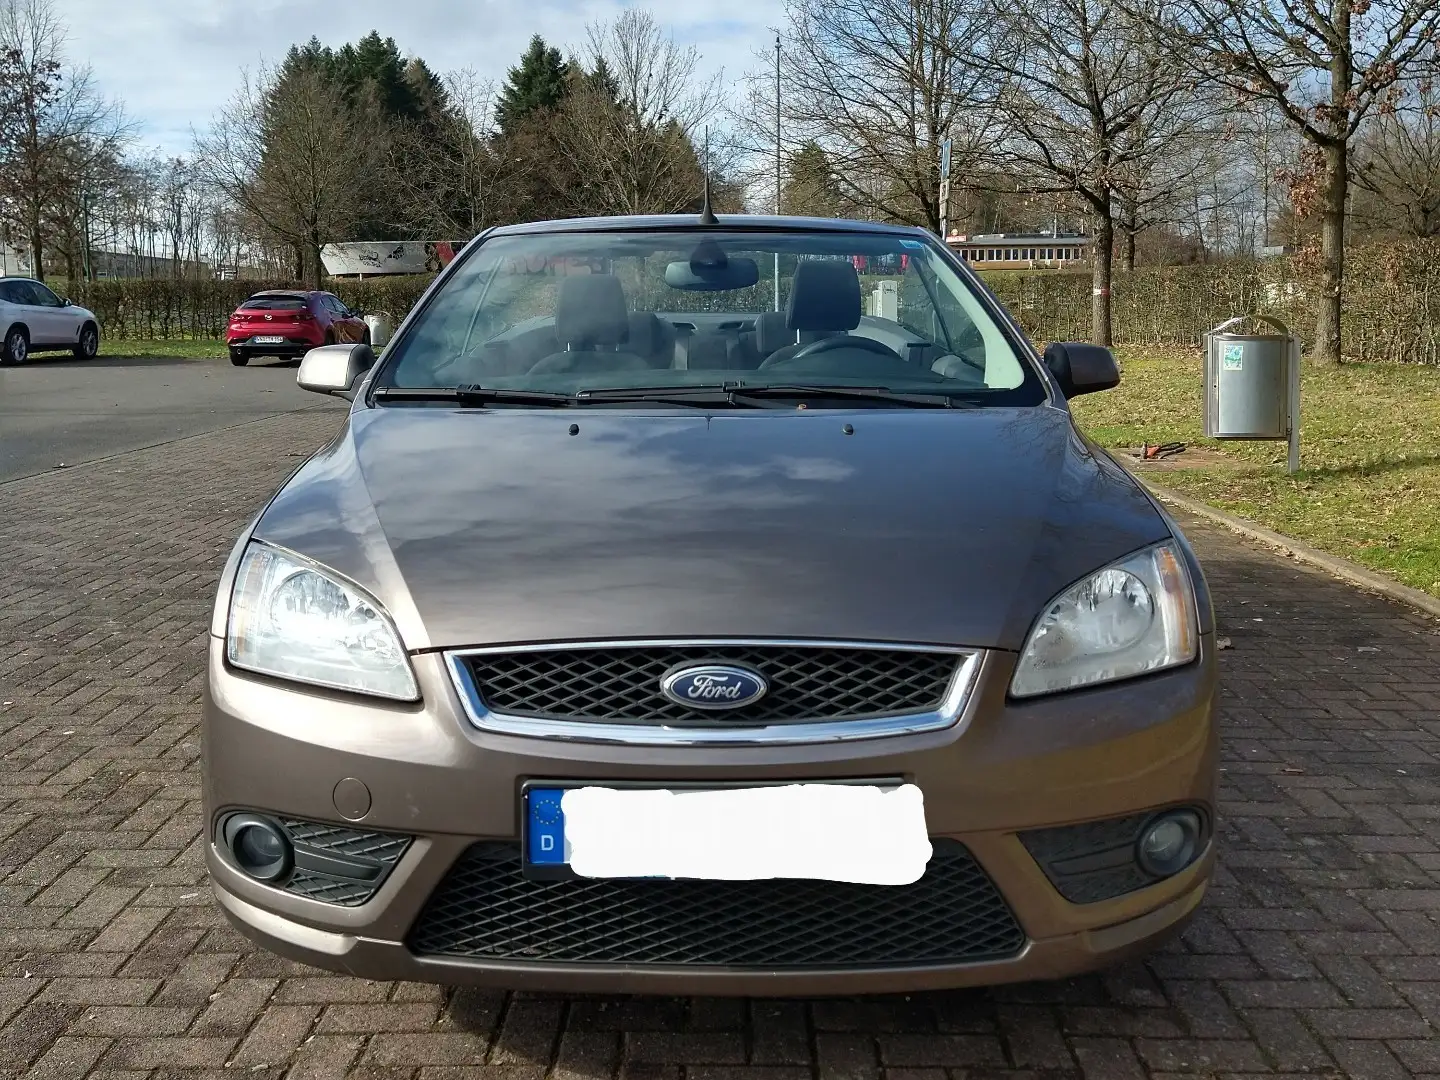 Ford Focus CC Coupe-Cabriolet 1.6 16V Trend Marrón - 1